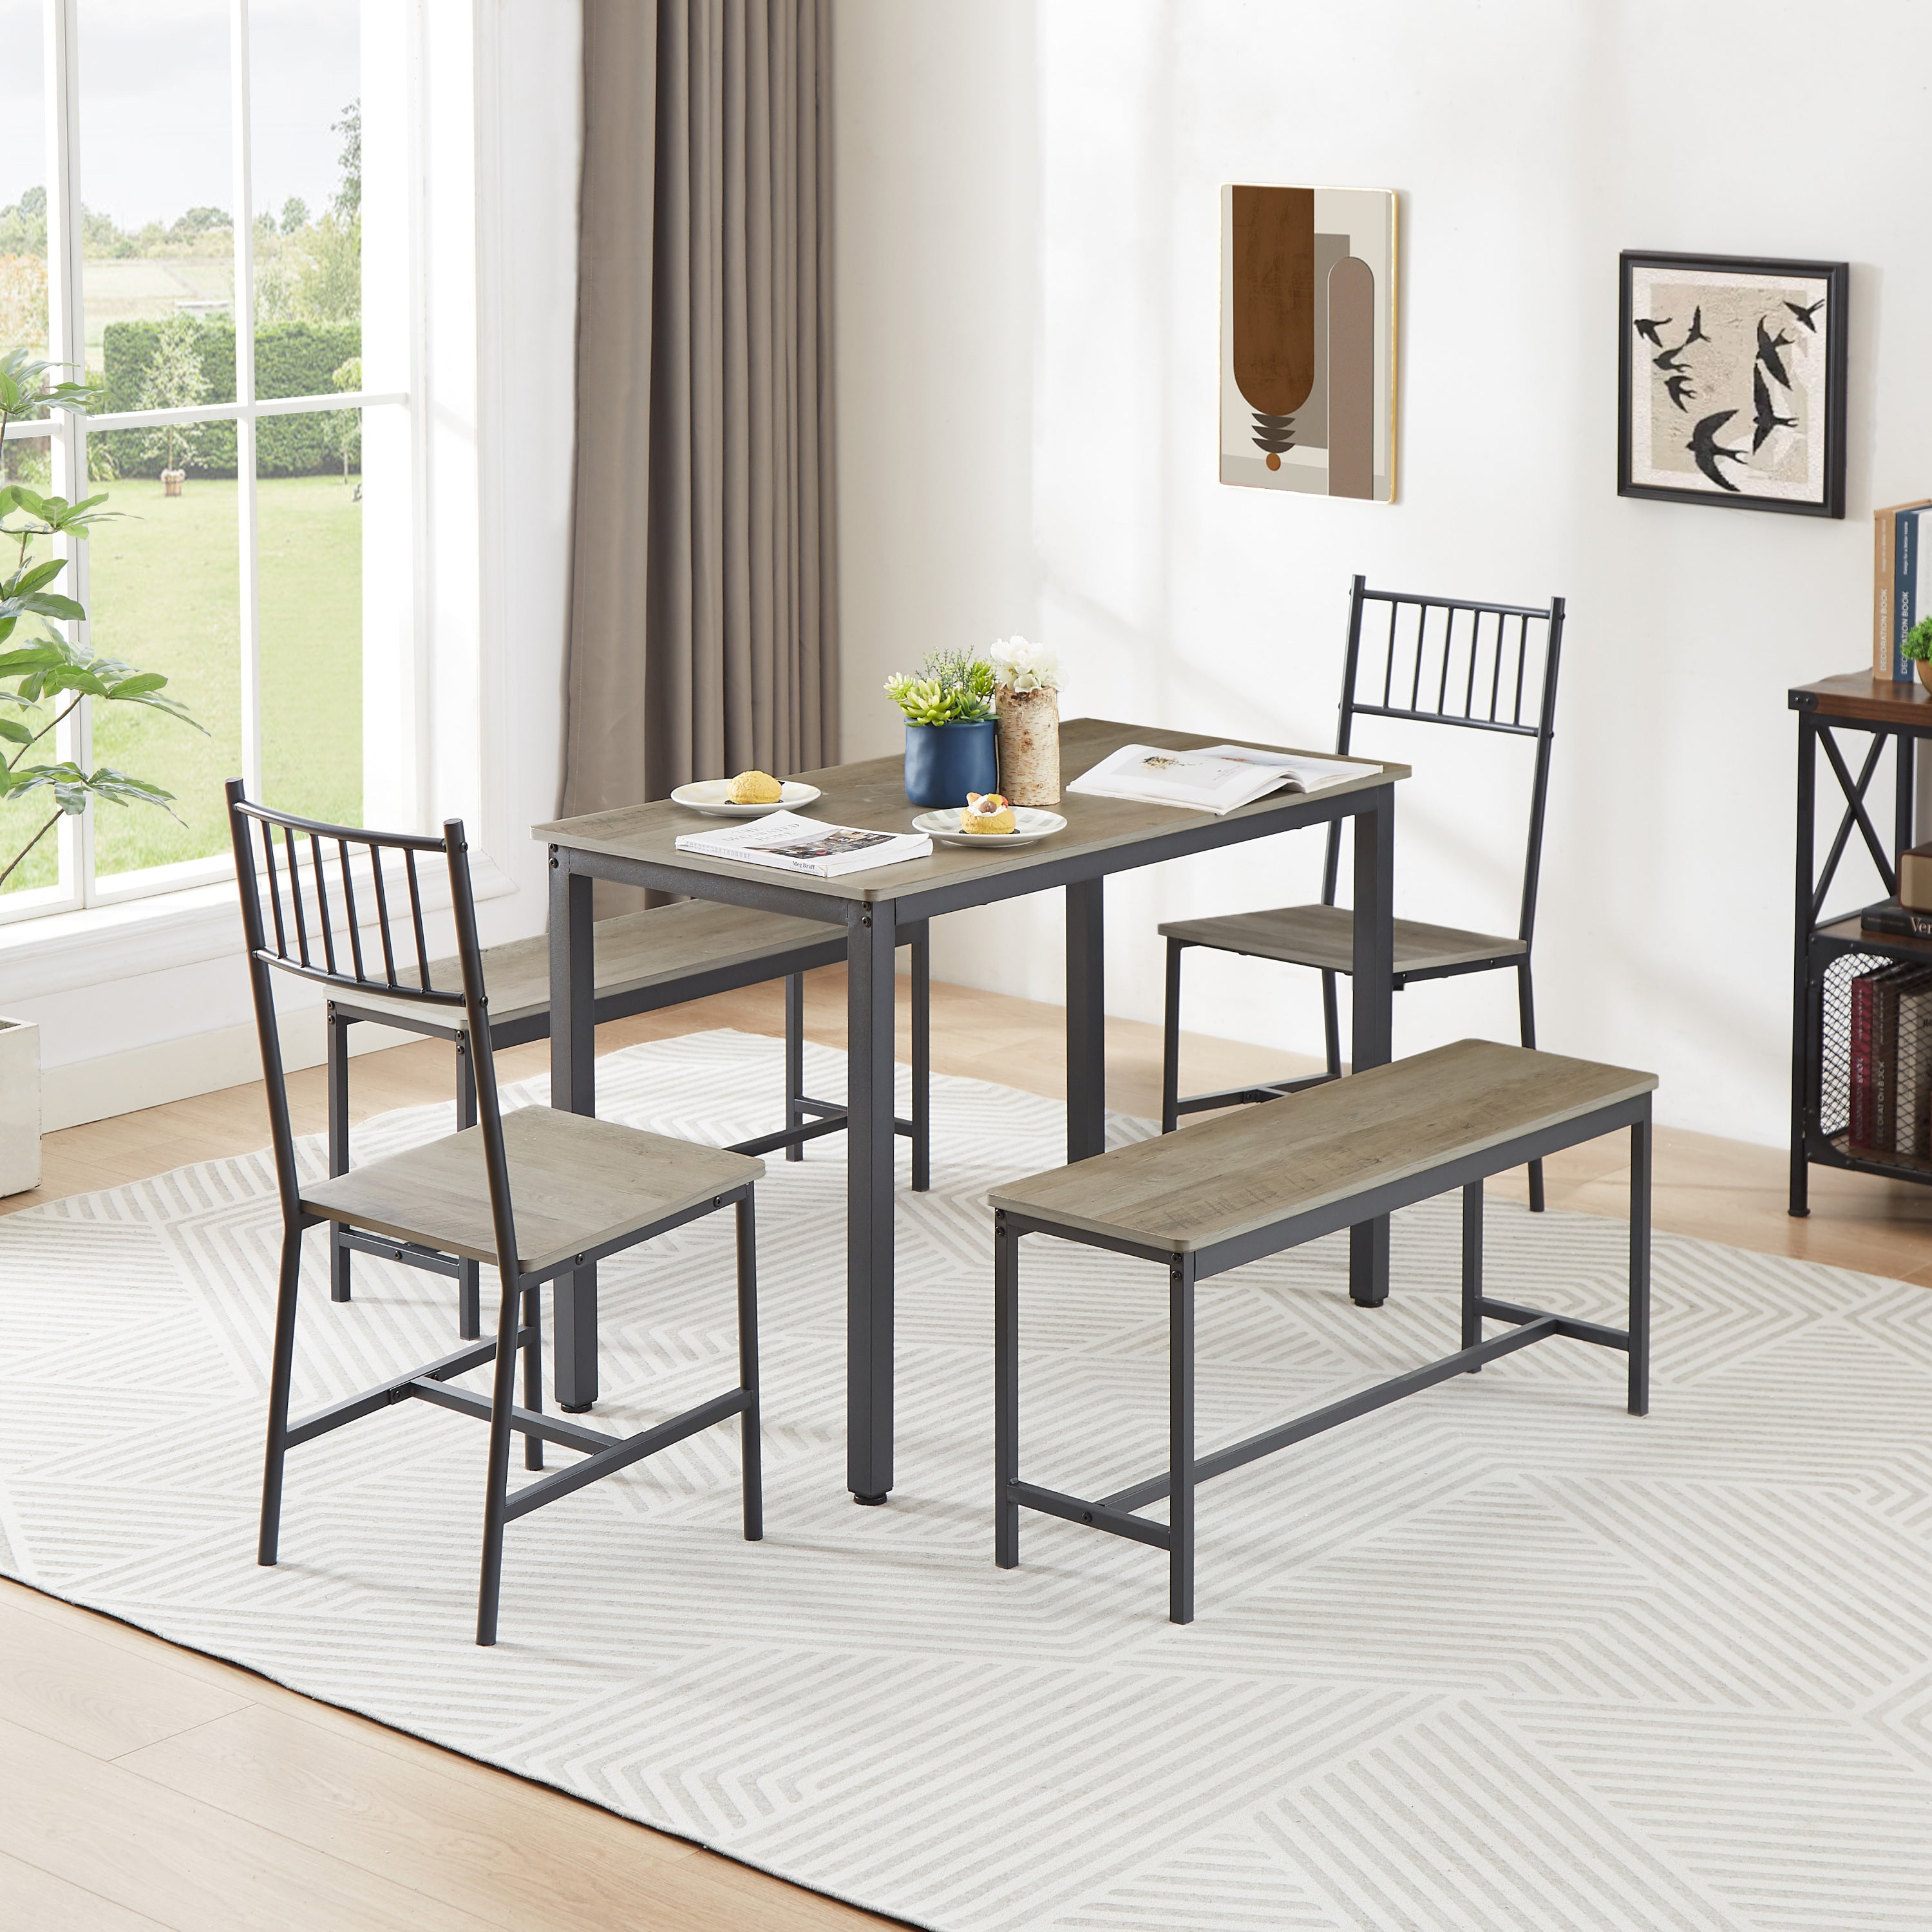 🆓🚛 Dining Table Set, Barstool Dining Table With 2 Benches 2 Back Chairs, Industrial Dining Table for Kitchen Breakfast Table, Living Room, Party Room, Rustic Gray and Black, 43.3″L X 23.6″W X 29.9″H